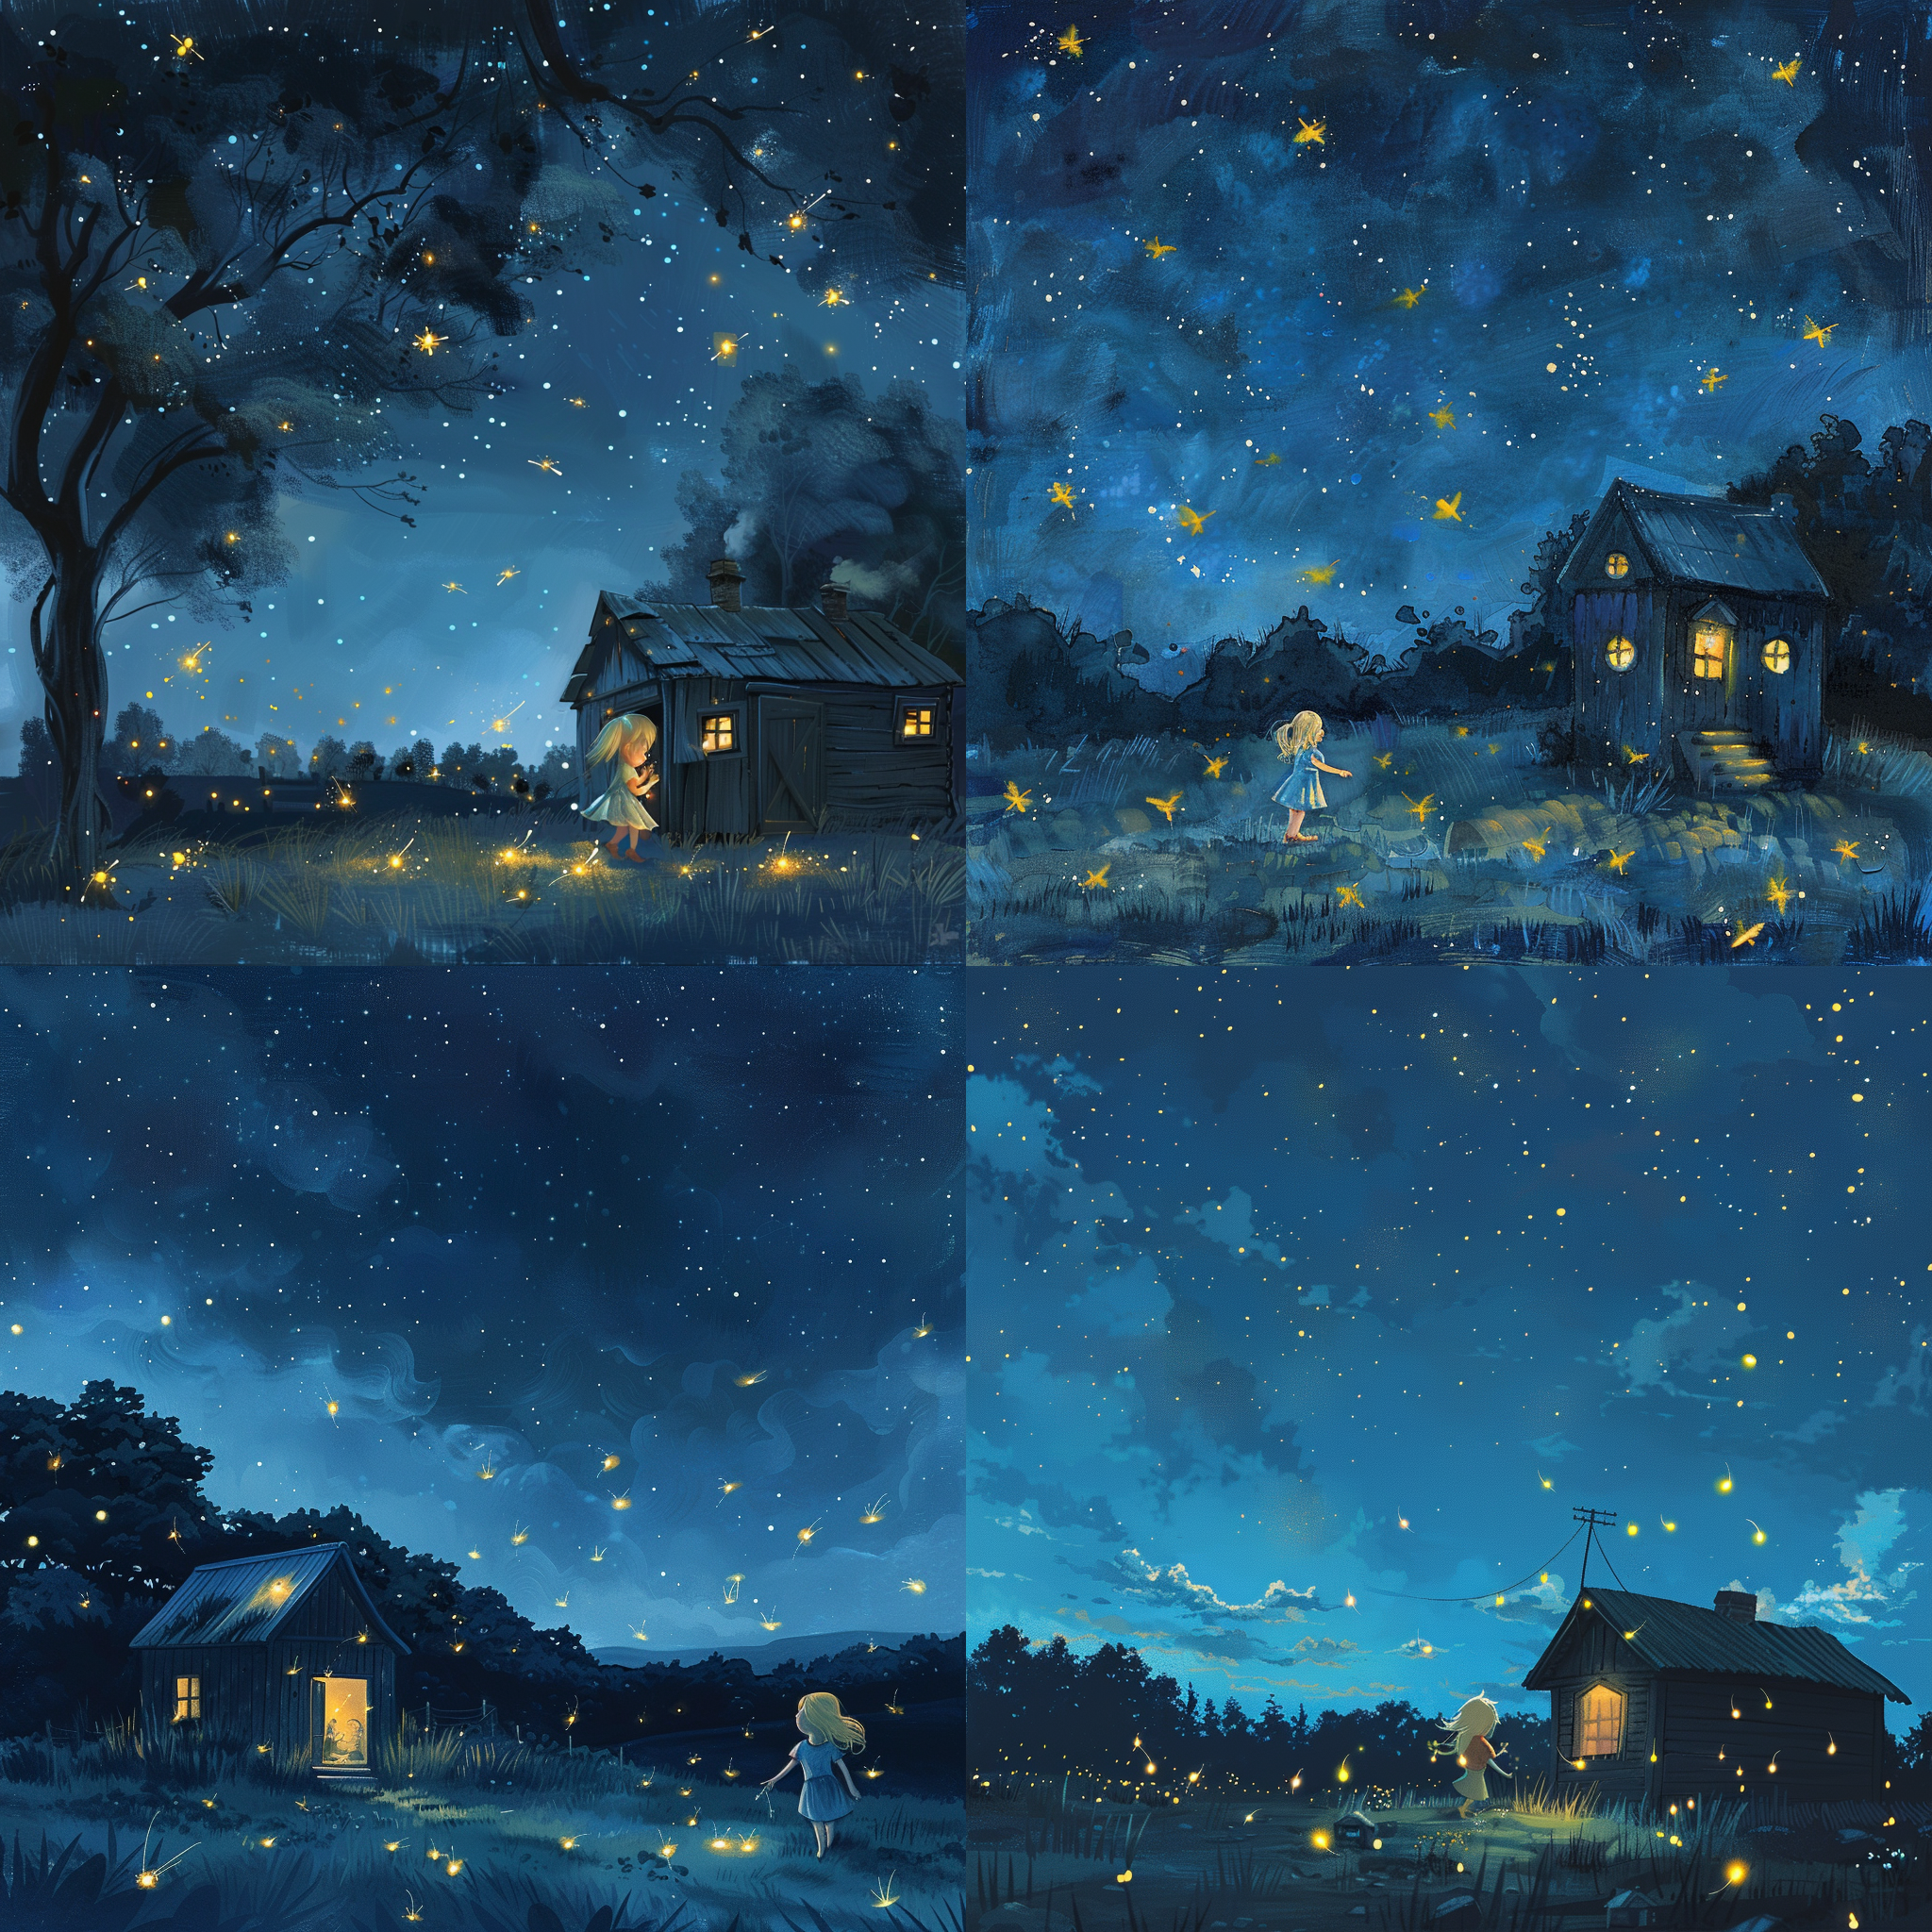 dark at night,
soft blue calming sky,
stars in the sky. 
small house 
female child,
blond hair,
fireflies dancing